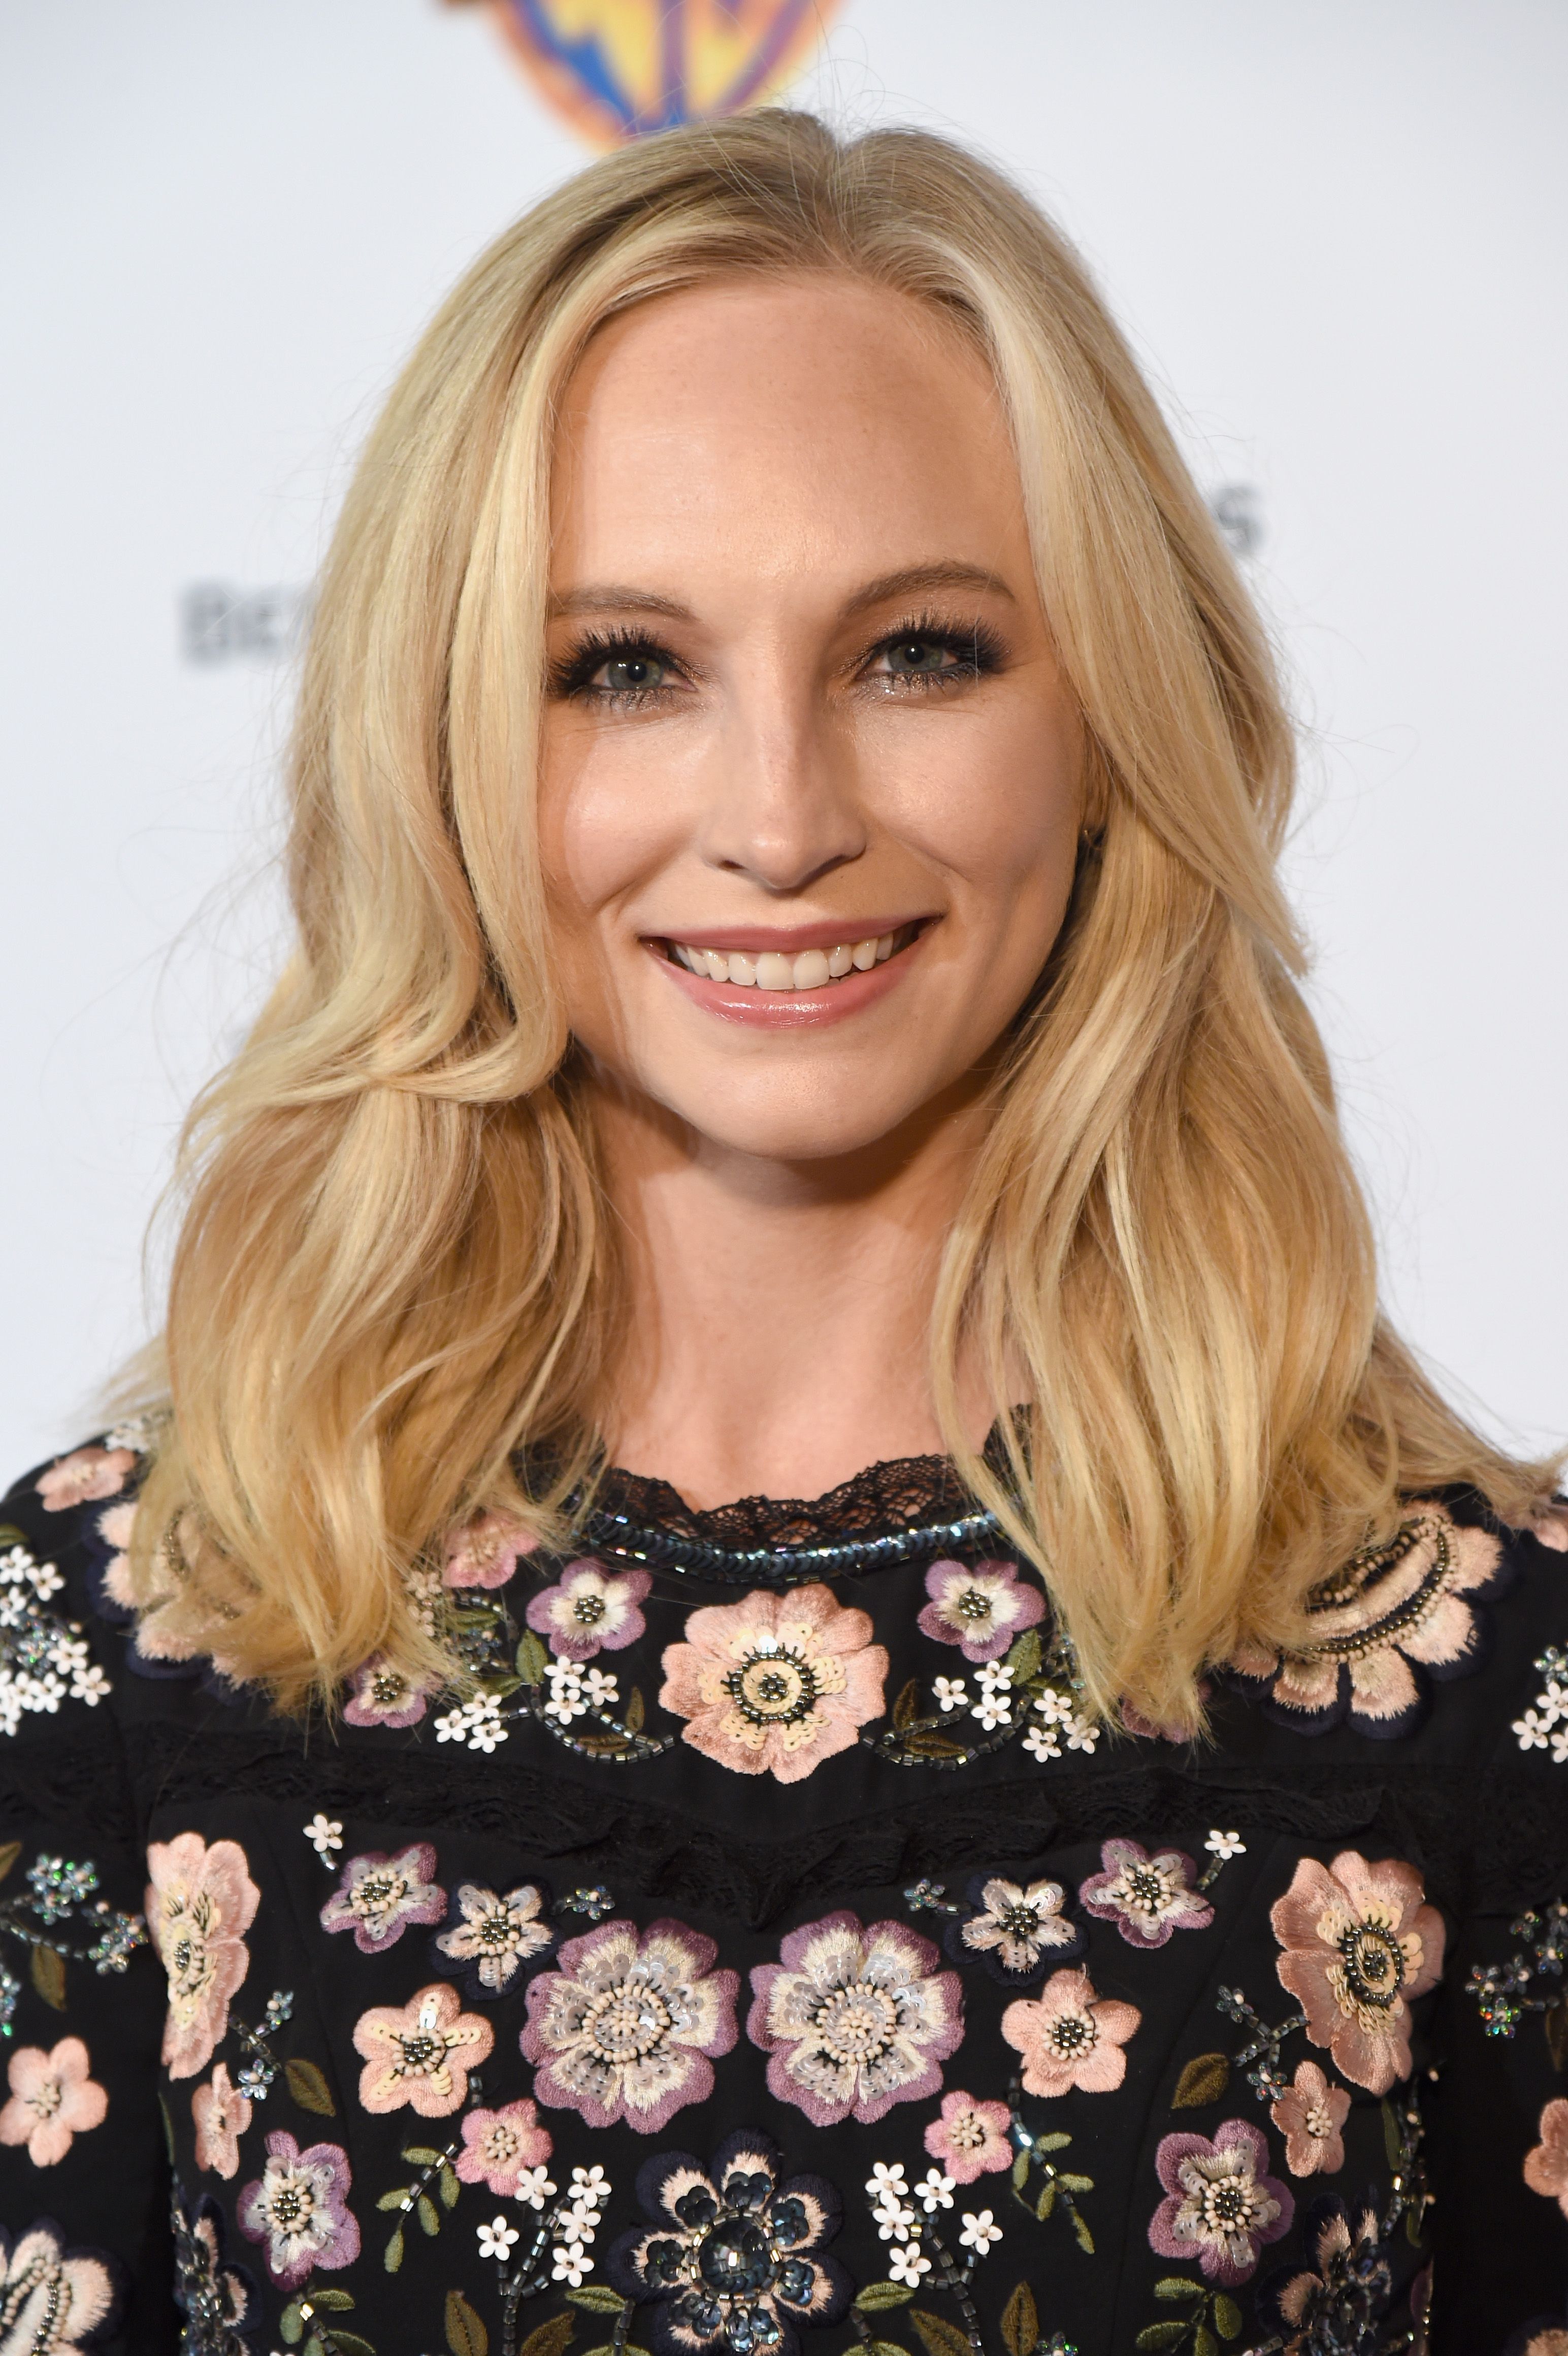 Candice King during the Barbara Berlanti Heroes Gala Benefitting FCancer at Warner Bros. Studios on October 13, 2018 in Burbank, California. | Source: Getty Images